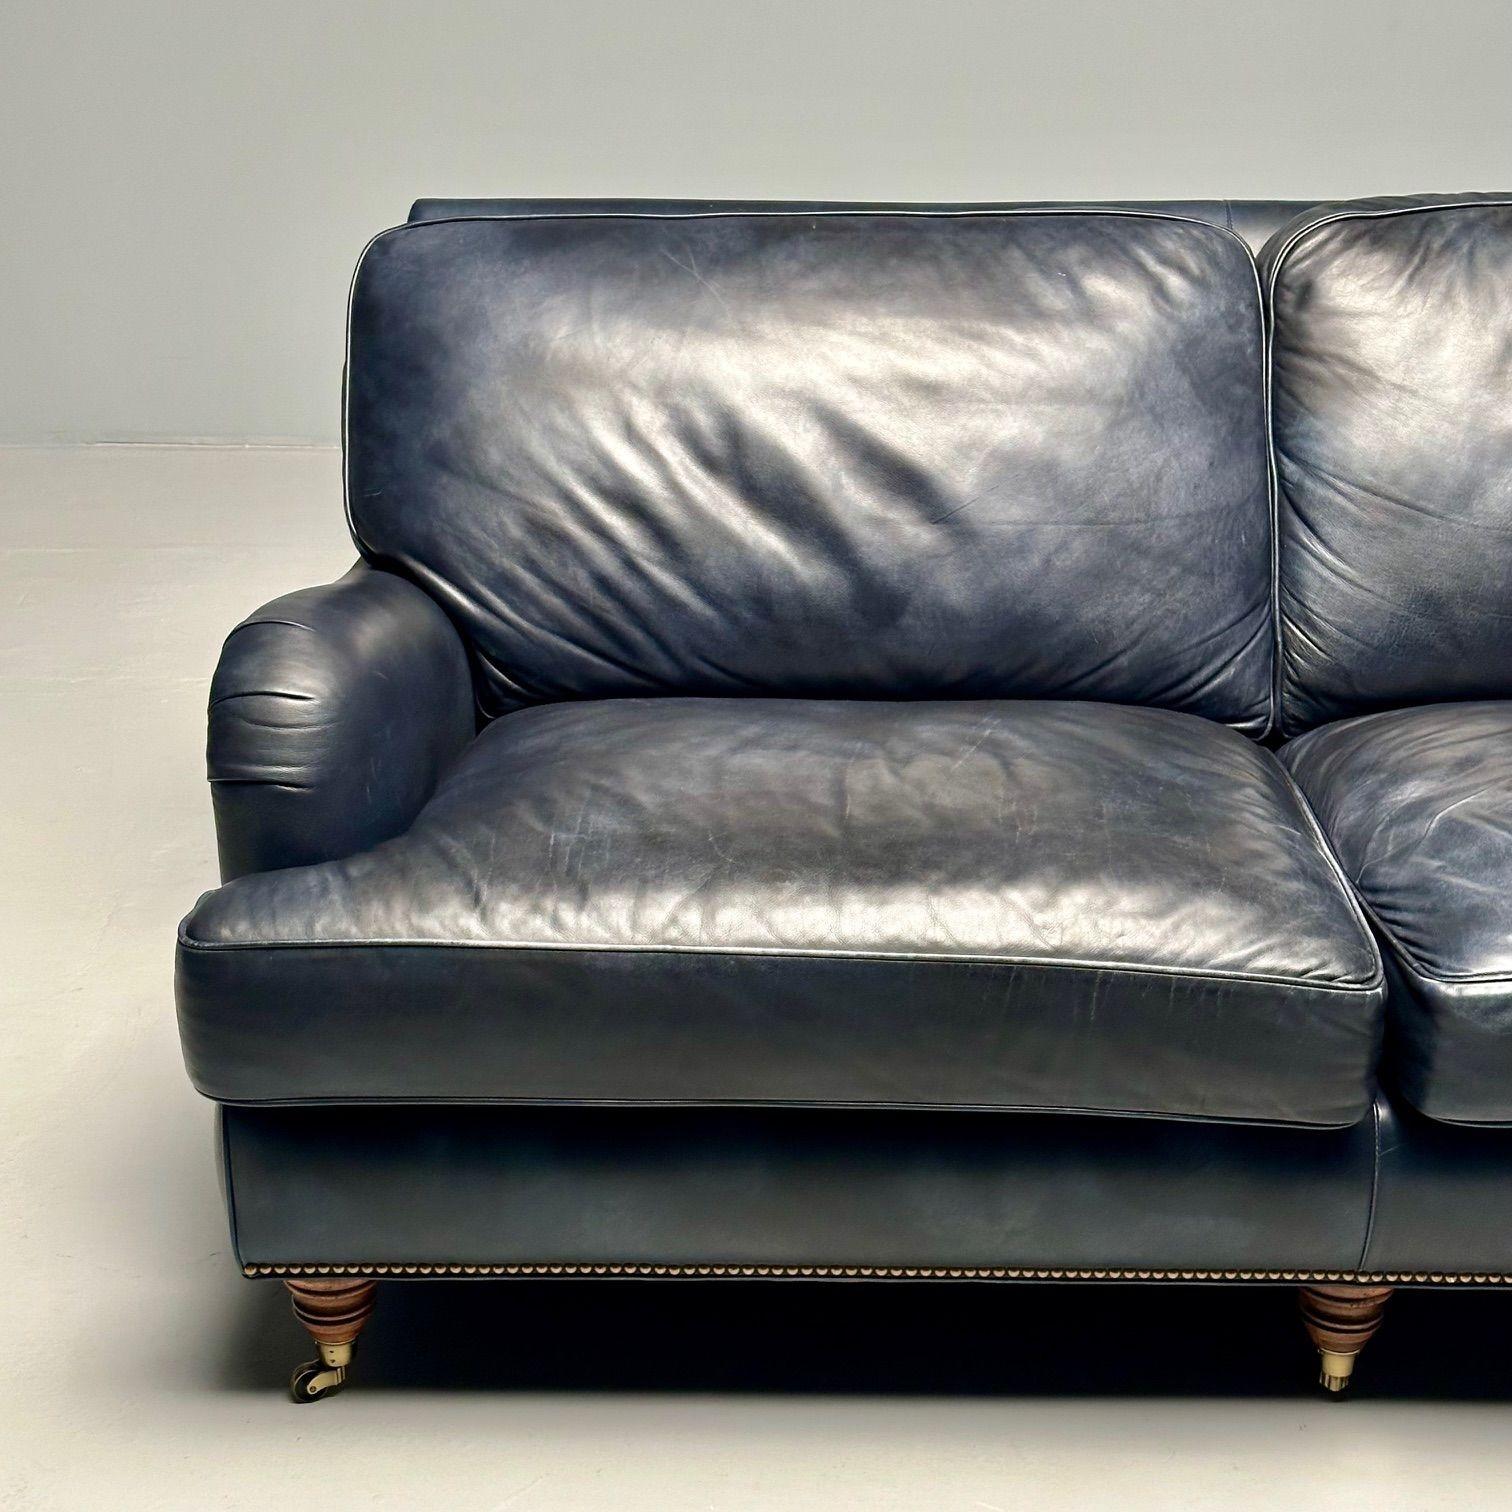 Hancock and Moore, Georgian Scroll Arm Sofa, Dark Blue Distressed Leather, 2000s For Sale 2